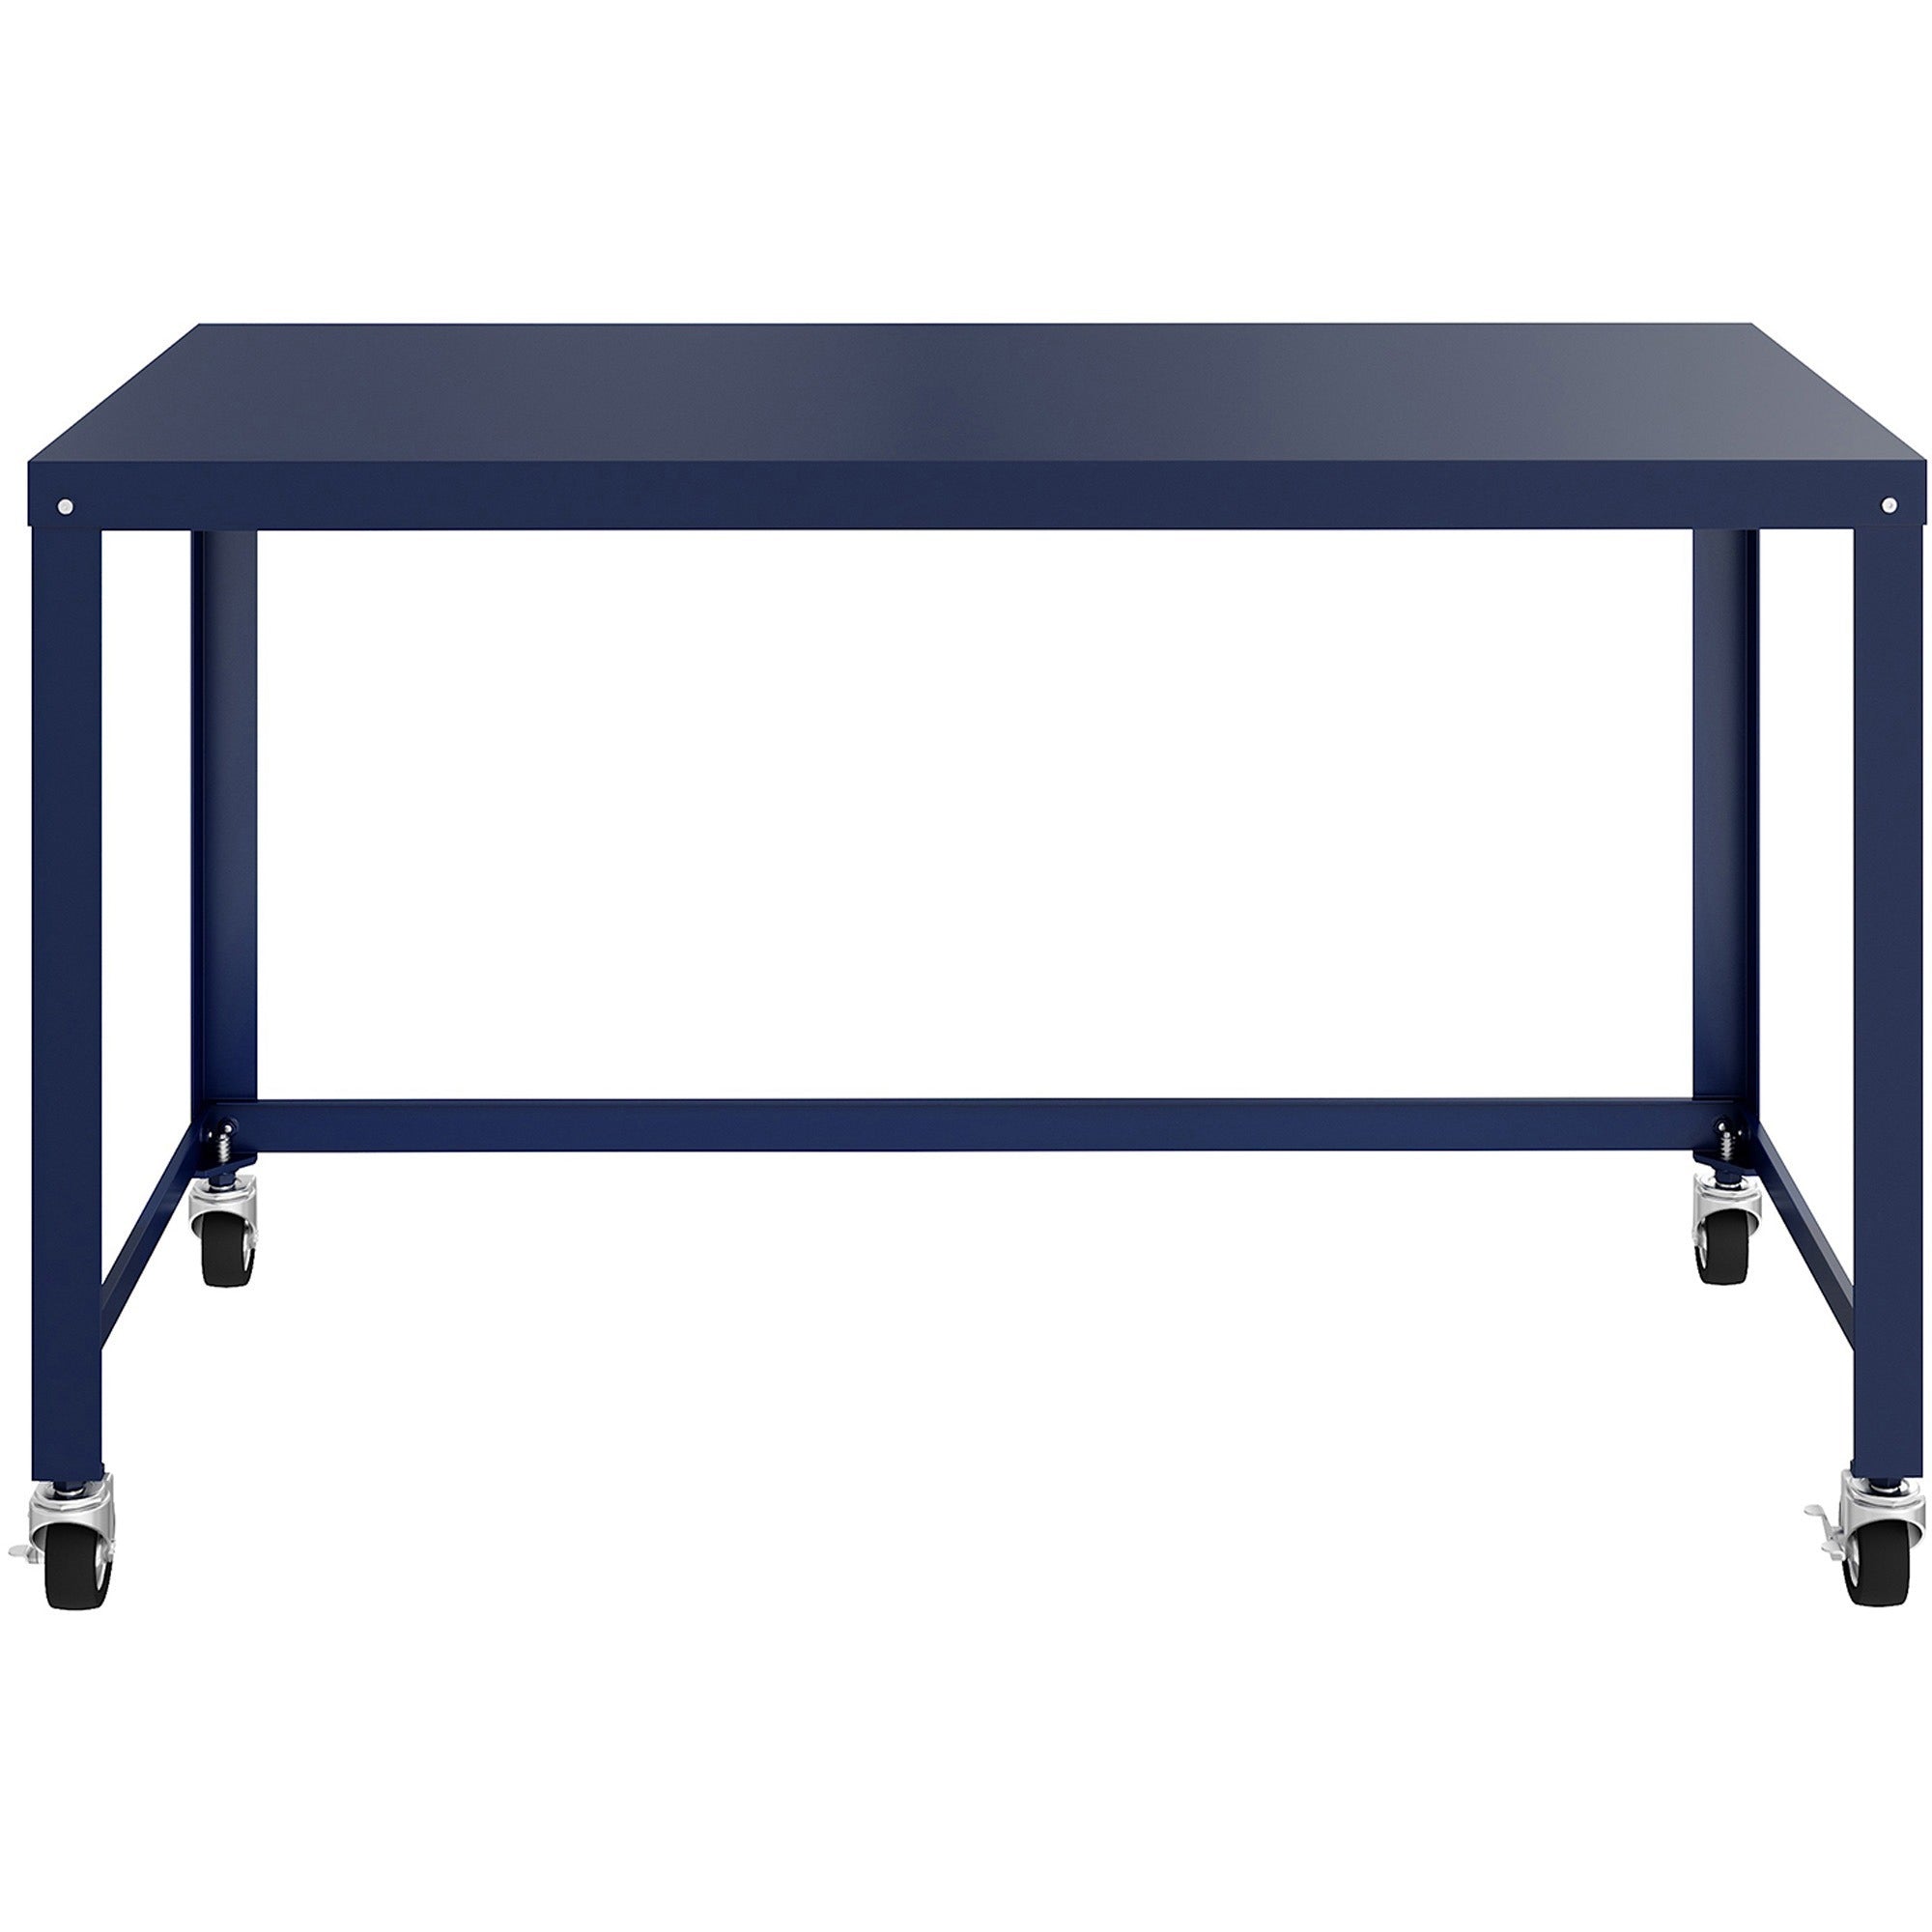 lorell-soho-personal-mobile-desk-for-table-toprectangle-top-200-lb-capacity-48-table-top-length-x-24-table-top-width-30-height-assembly-required-navy-steel-1-each_llr18335 - 2